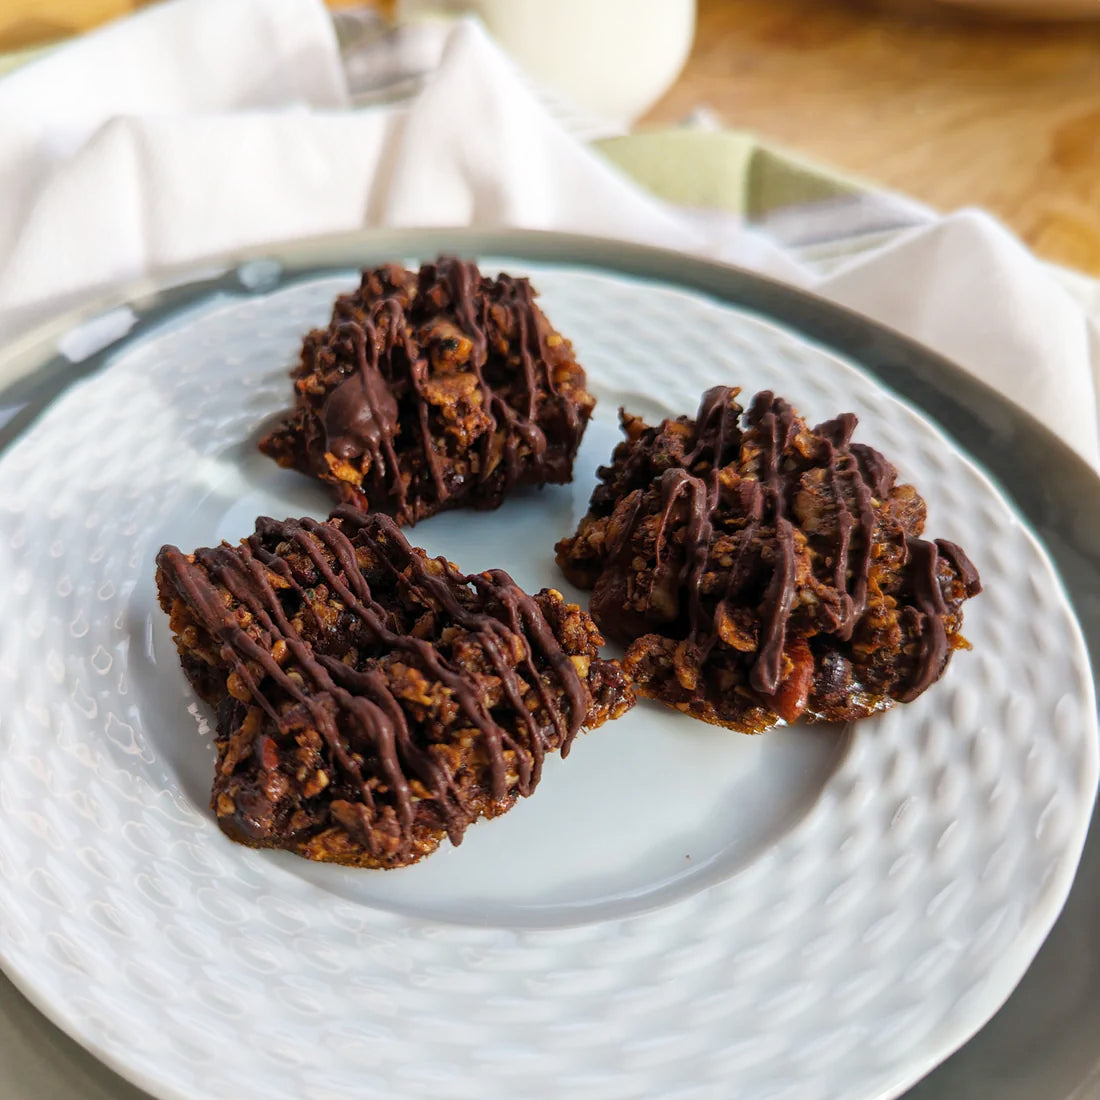 A plate of flavorful cookies made using only three ingredients.